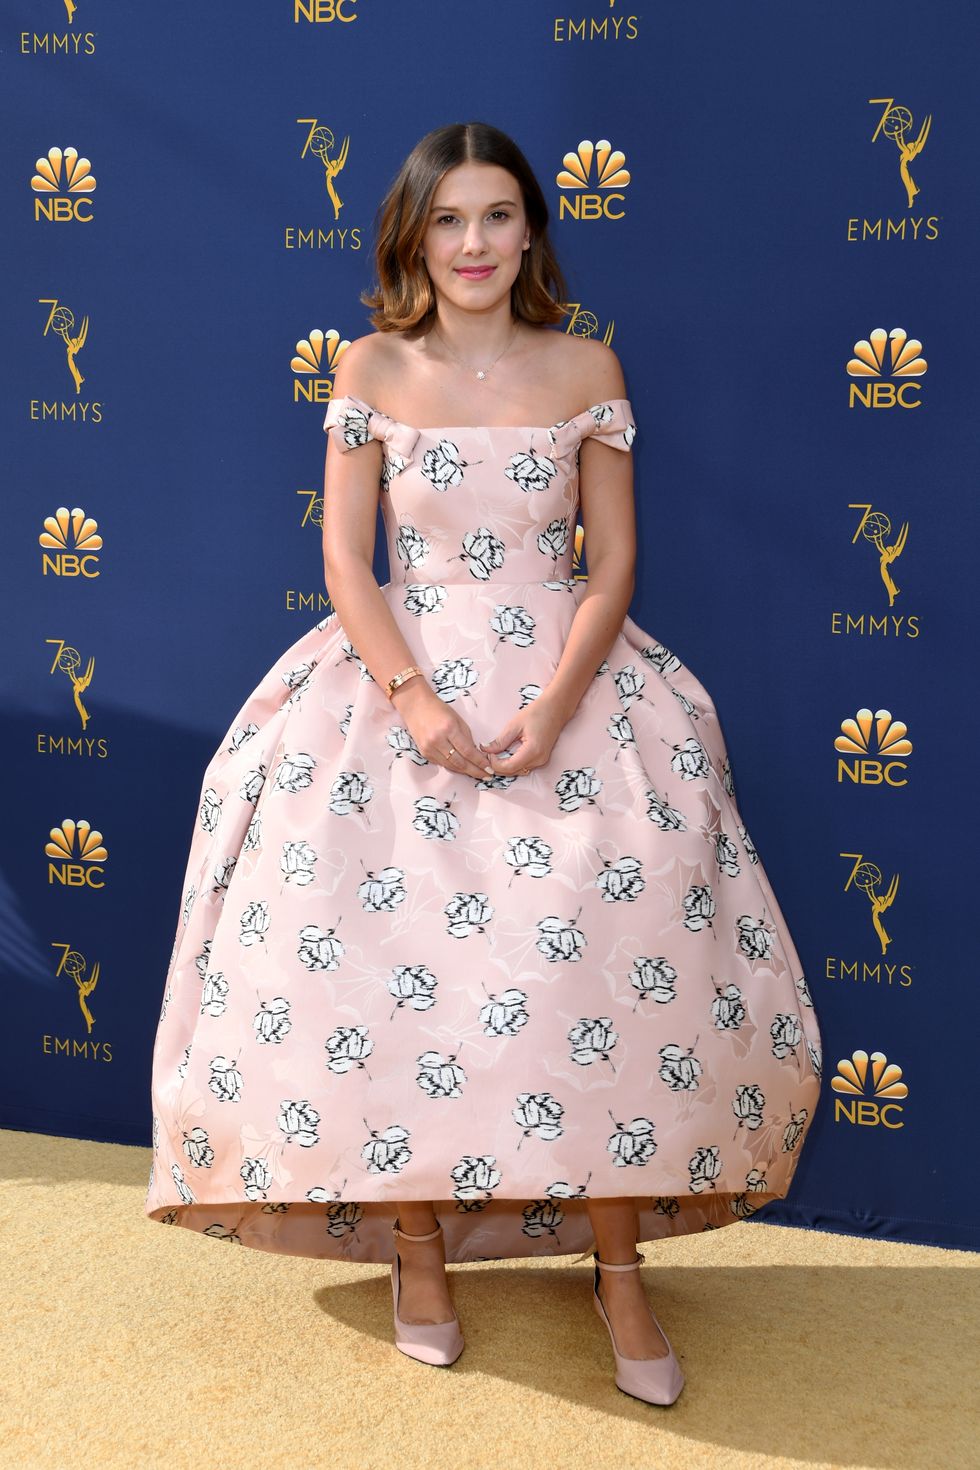 See Millie Bobby Brown On The Emmys Red Carpet Then Vs. Now!